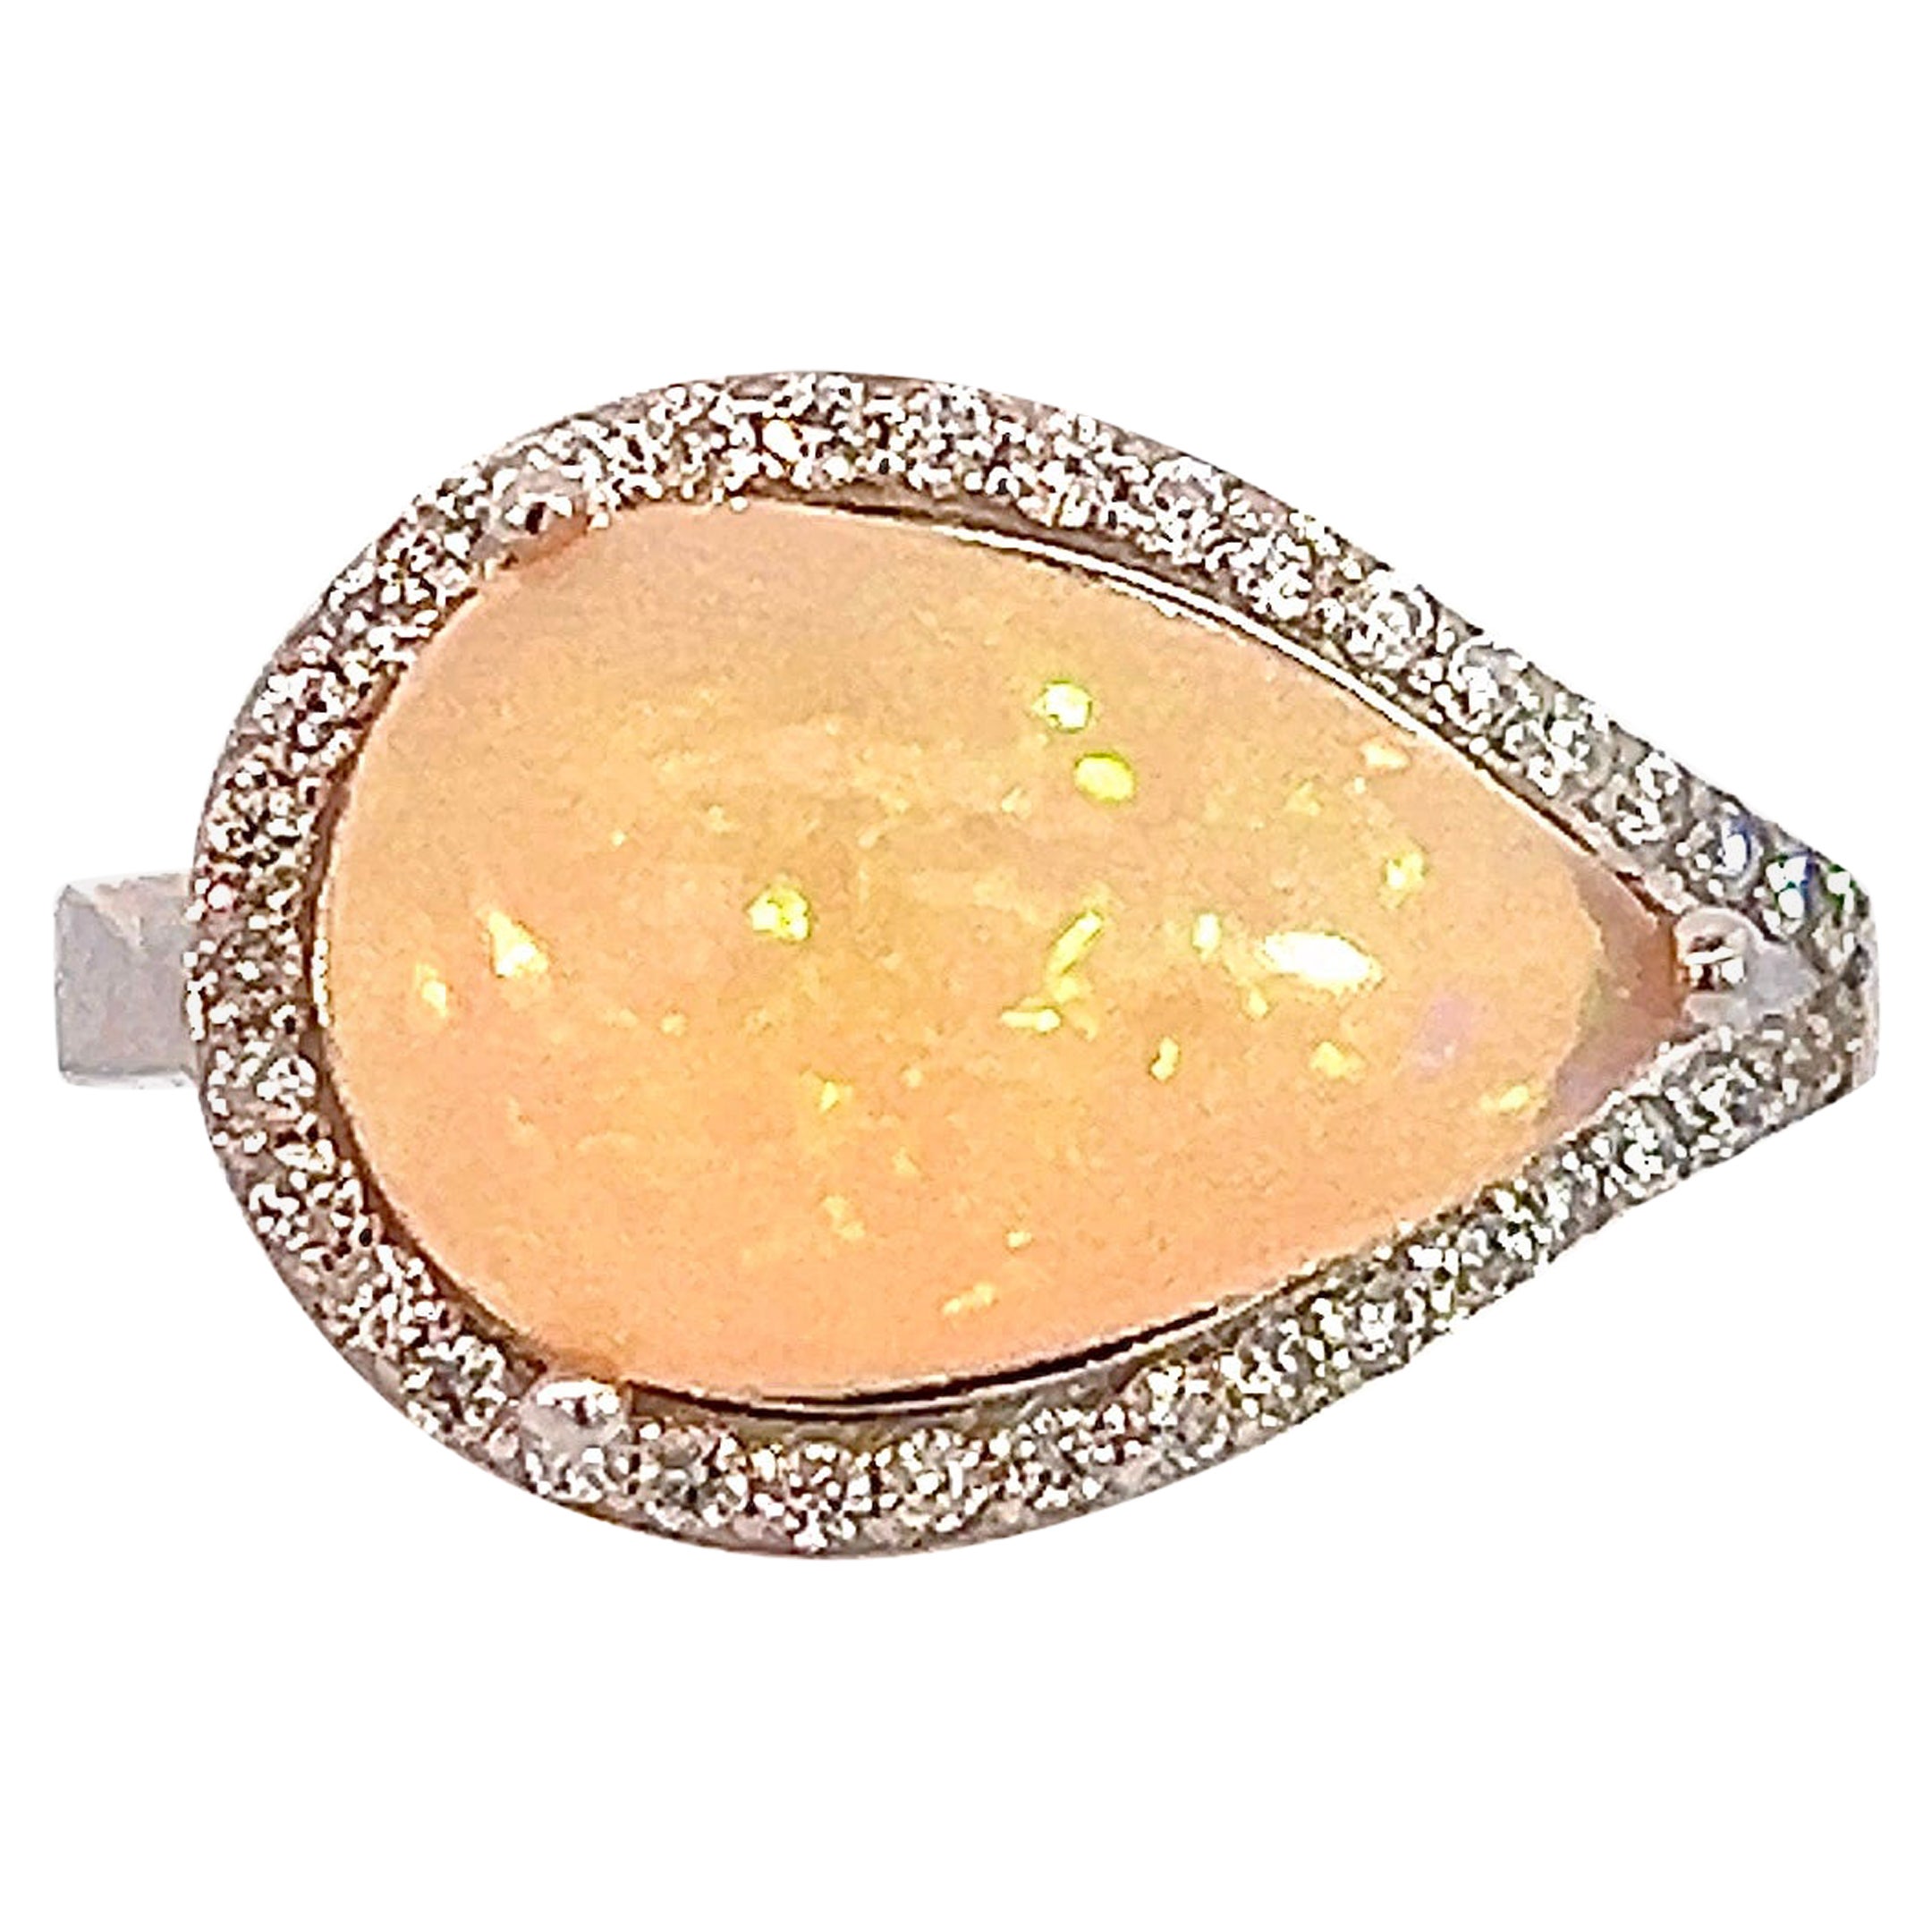 Natural Opal Diamond Ring 6.75 14k W Gold 4 TCW Certified For Sale